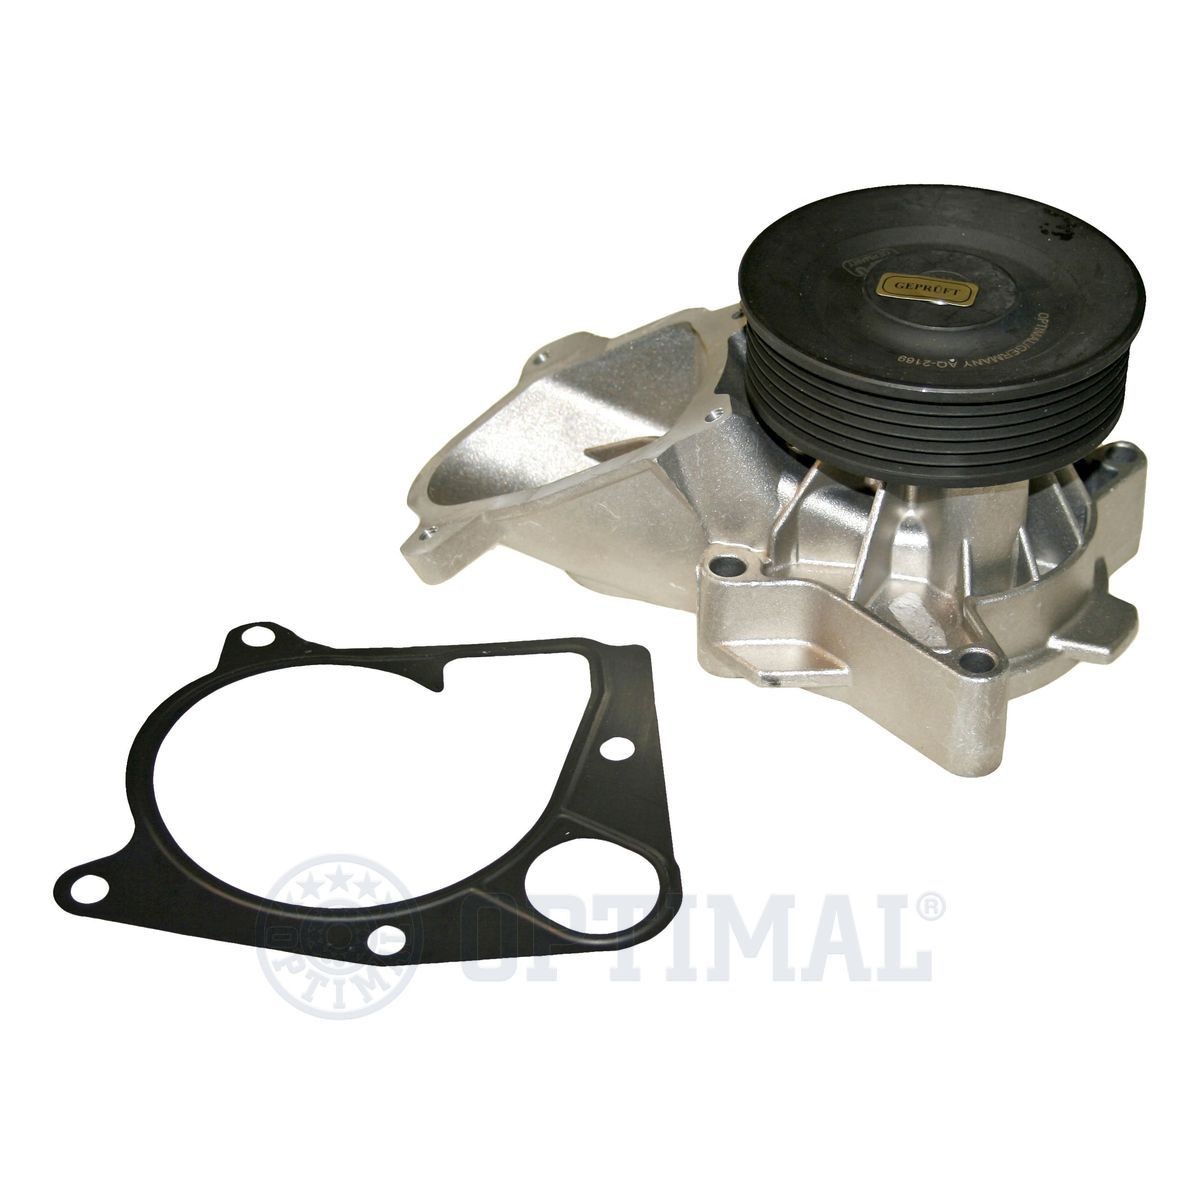 OPTIMAL with seal, Mechanical Water pumps AQ-2169 buy